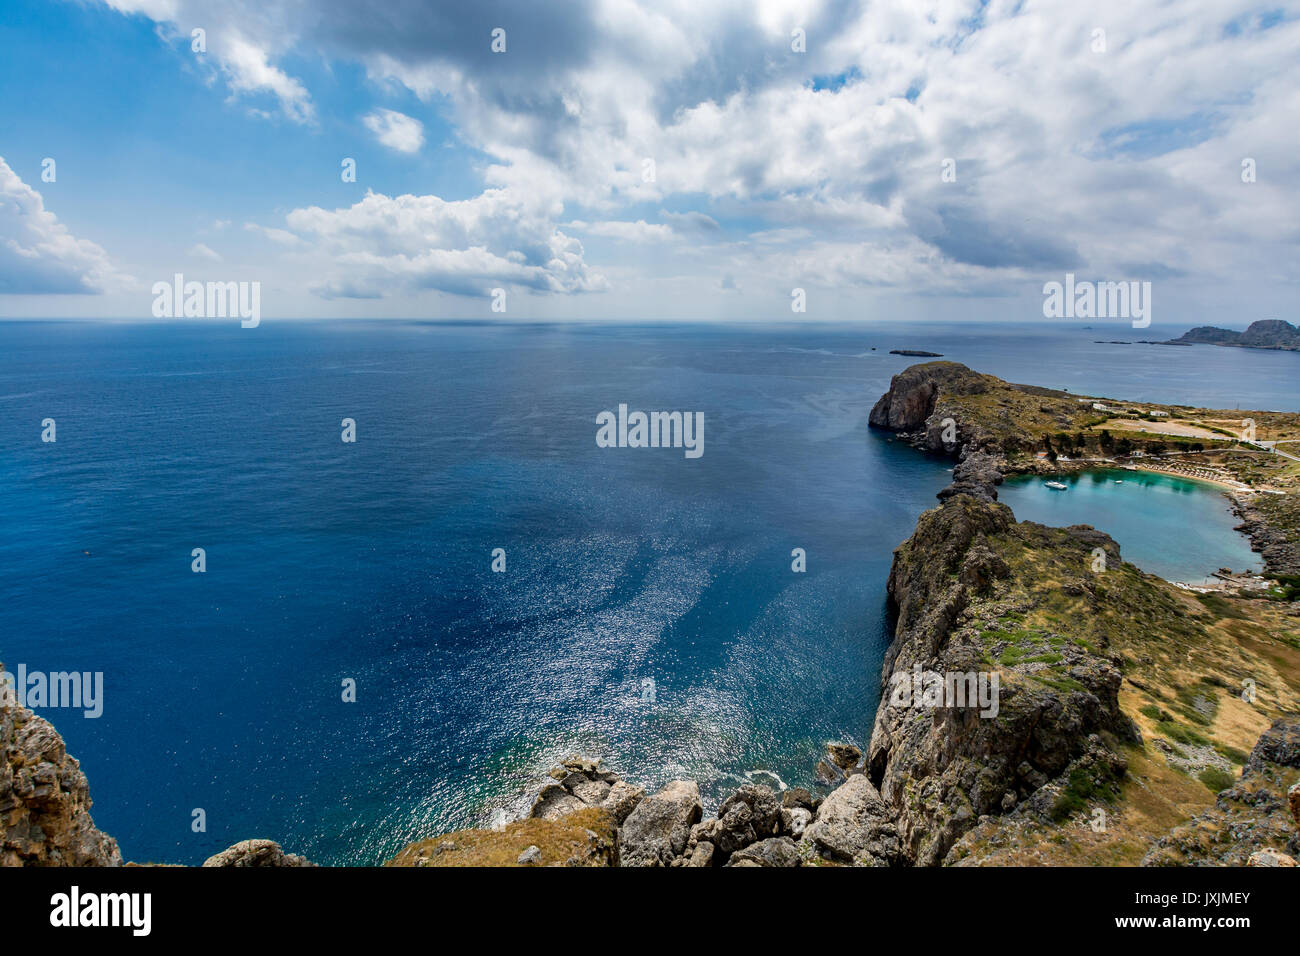 View of St Paul's Bay on a cloudy day, view from the Lindos castle, Rhodes island, Greece Stock Photo